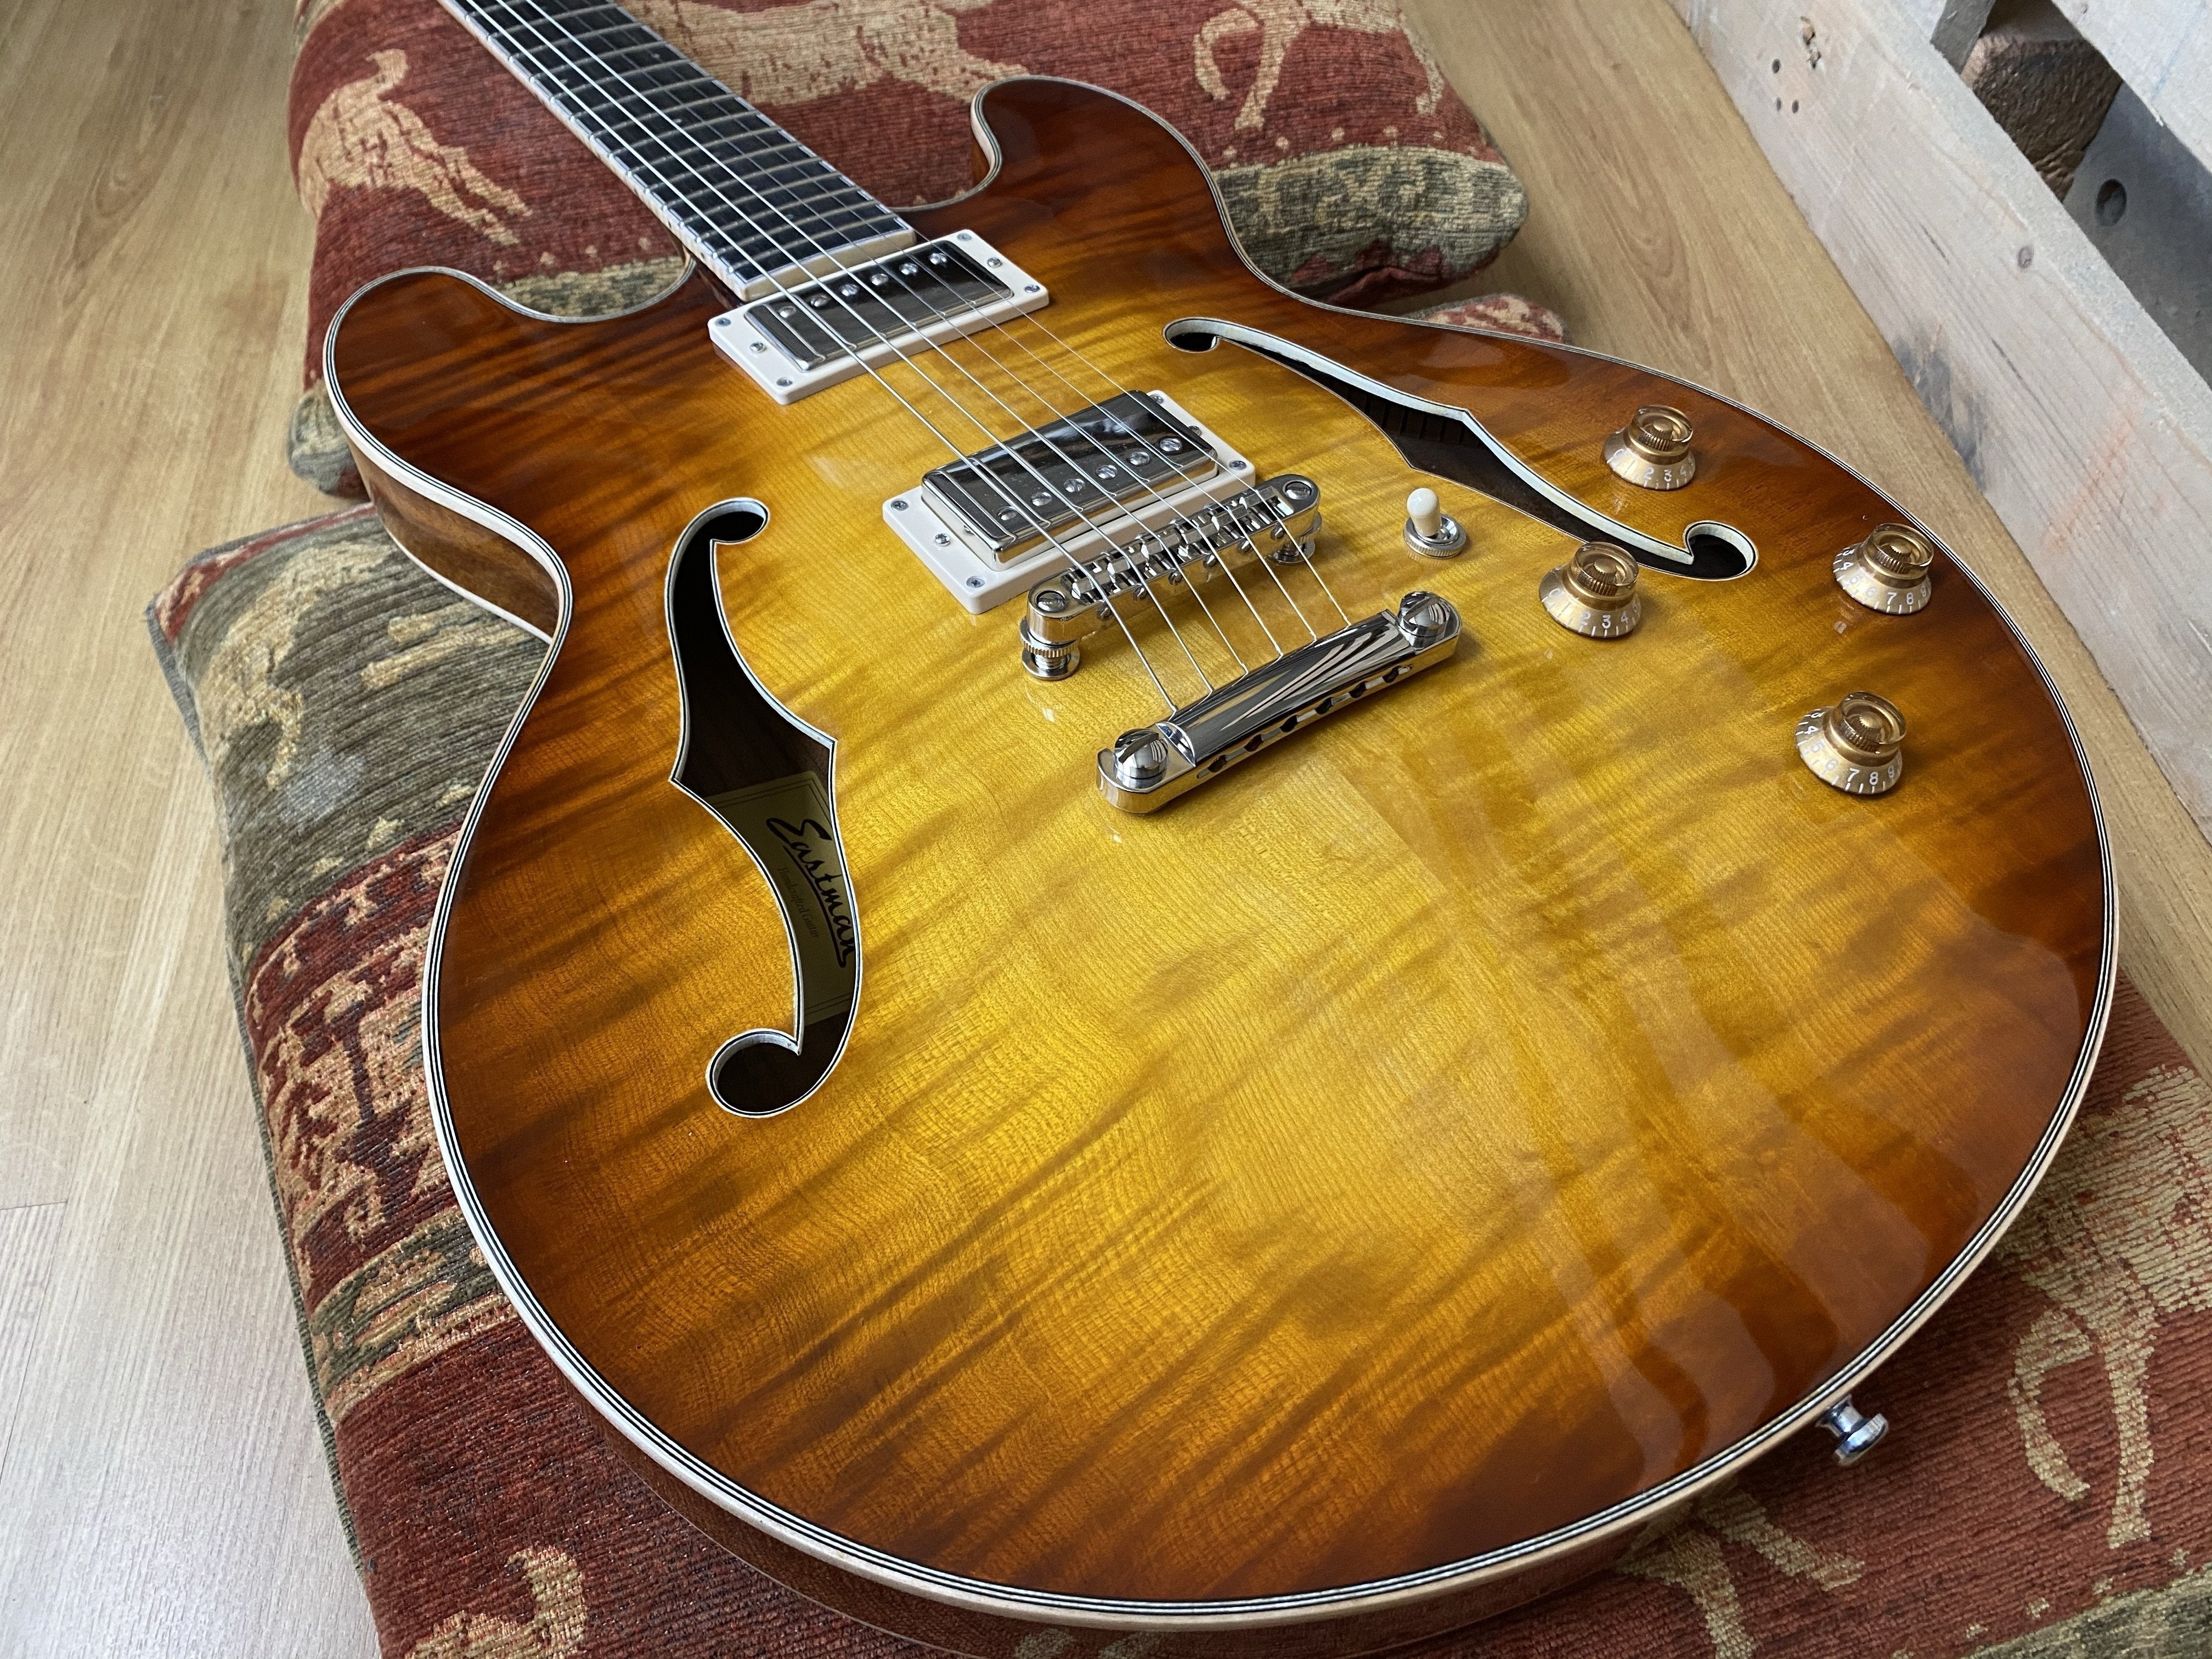 Eastman T186mx GB, Electric Guitar for sale at Richards Guitars.